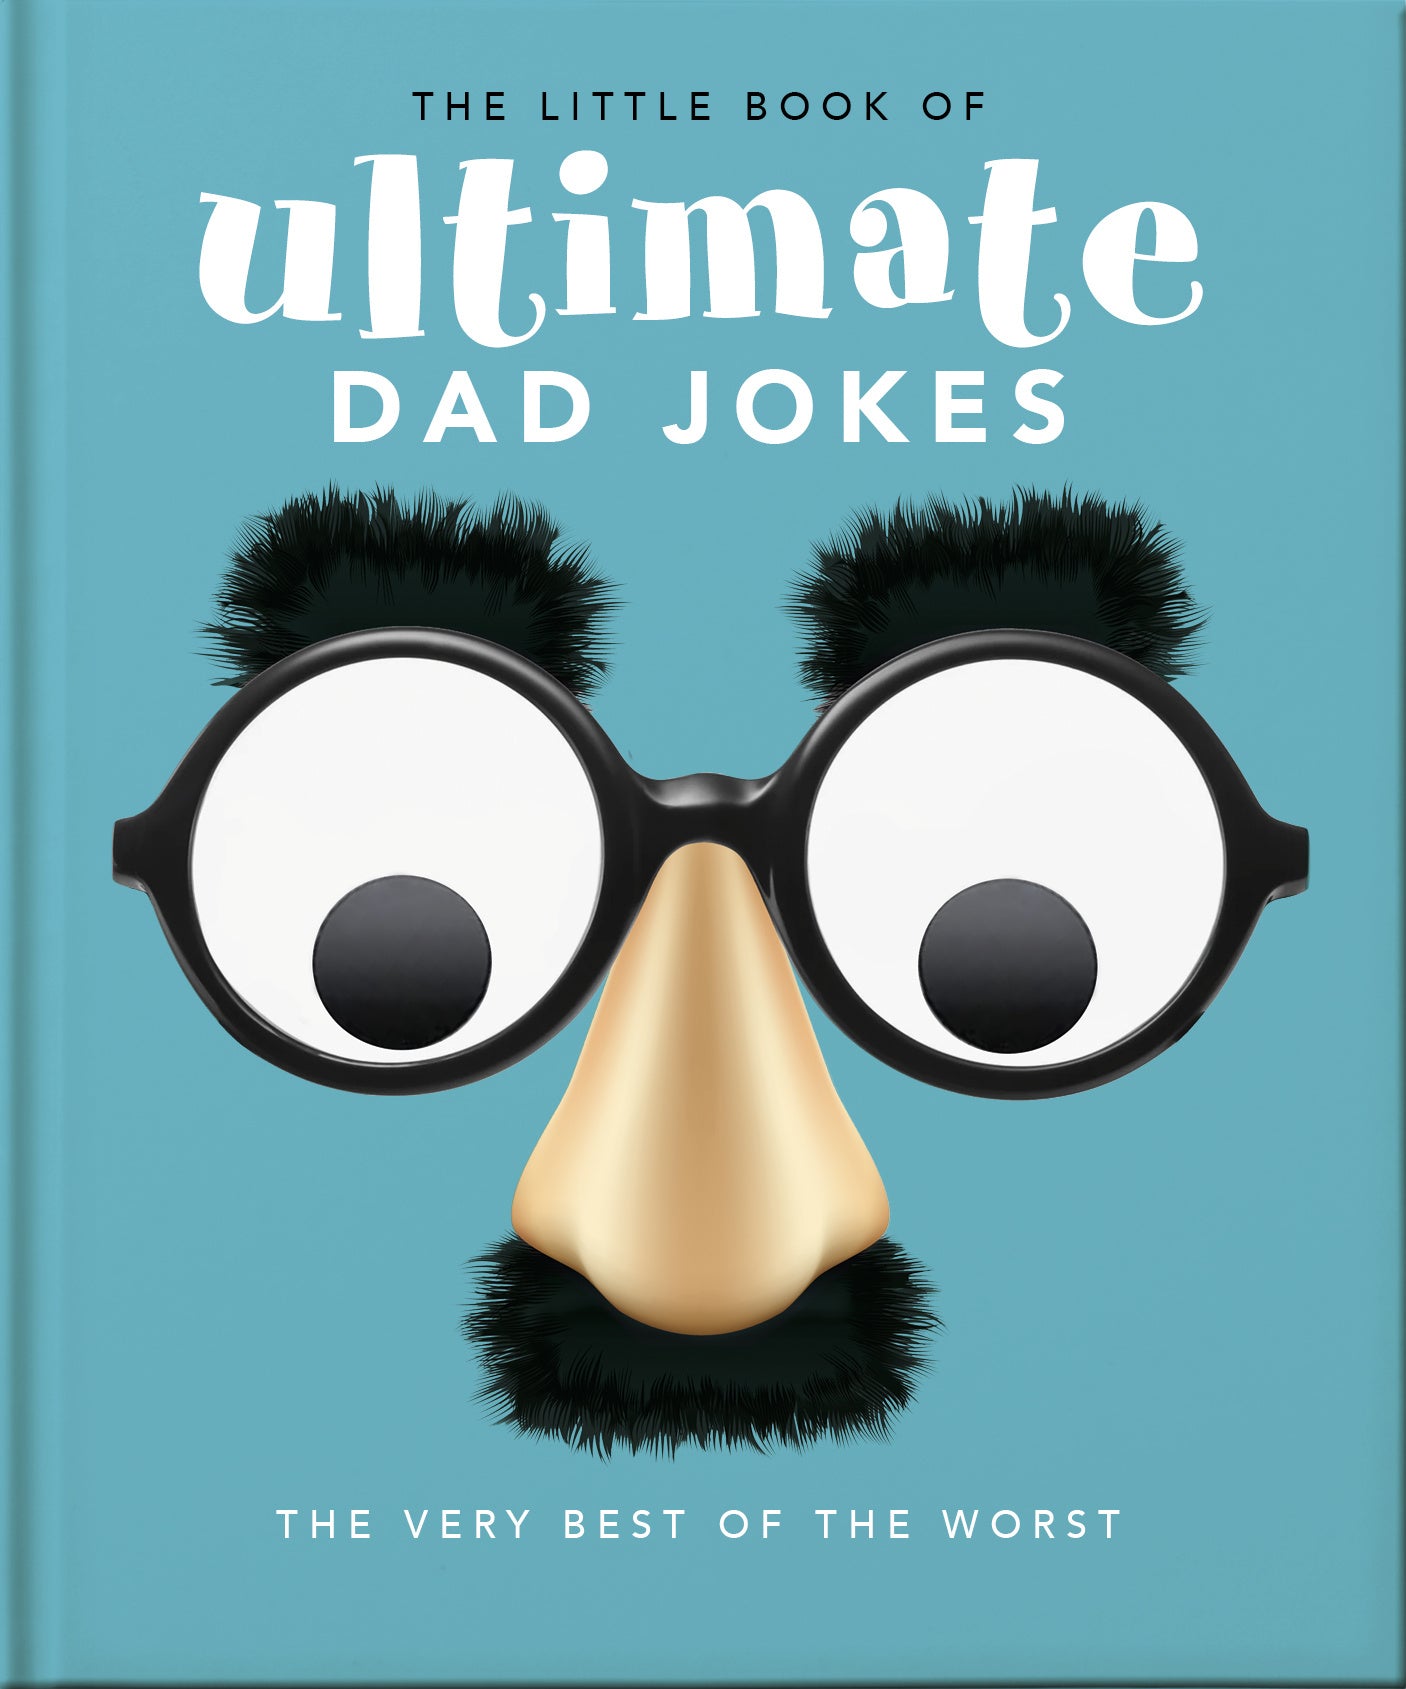 The Little Book of Ultimate Jokes